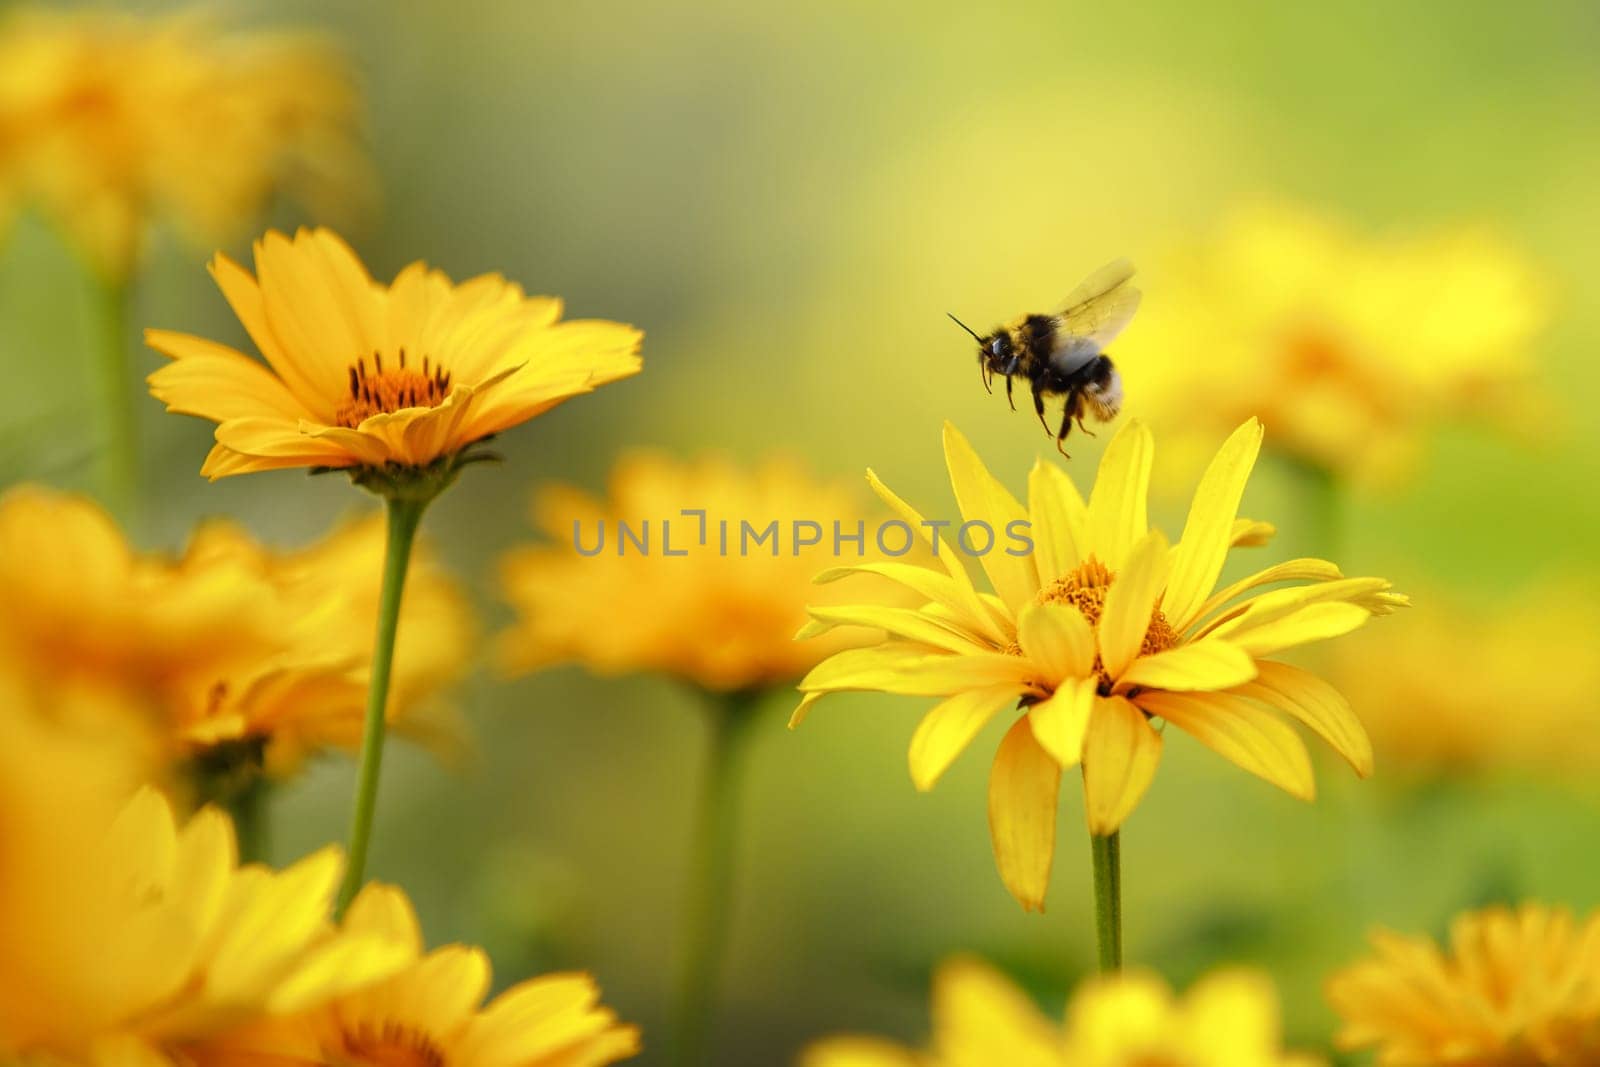 Bumblebee in flight, she tries to land on a petal of yellow Echinacea flowers. Awesome and gorgeous blurred sunny floral outdoor background perfect for a gift card.